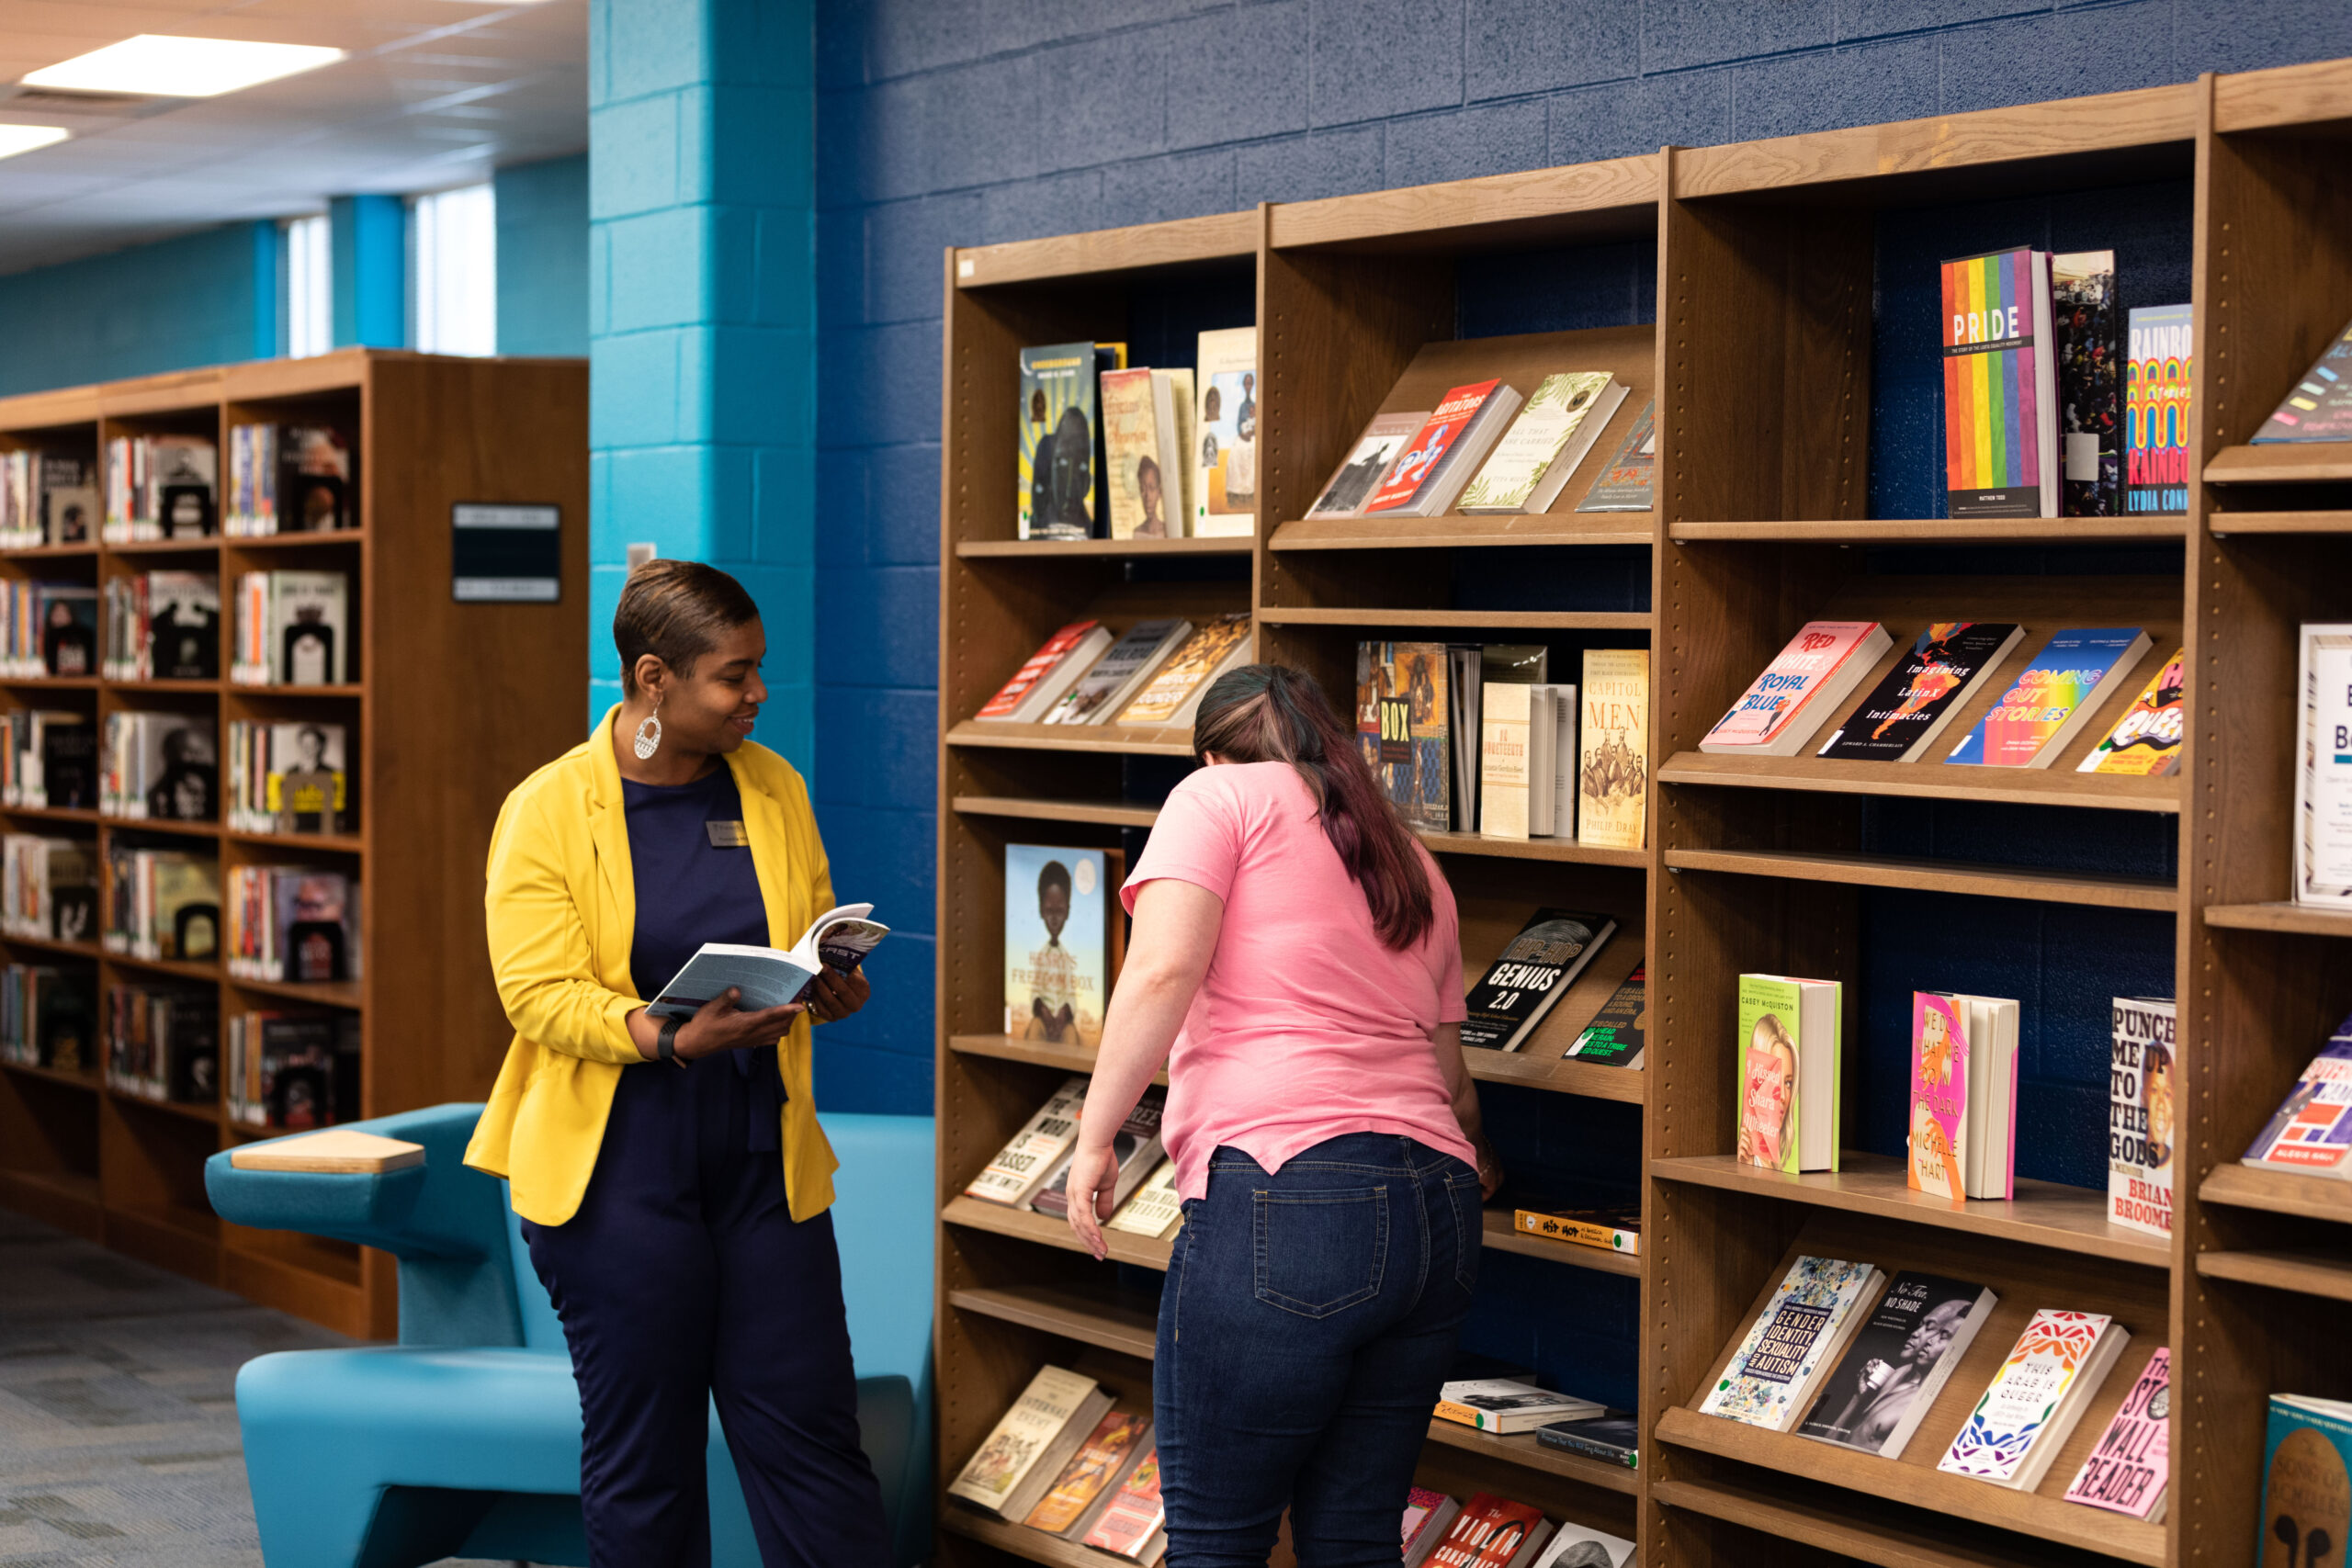 A Librarian helping a student pick out a book from the shelf.